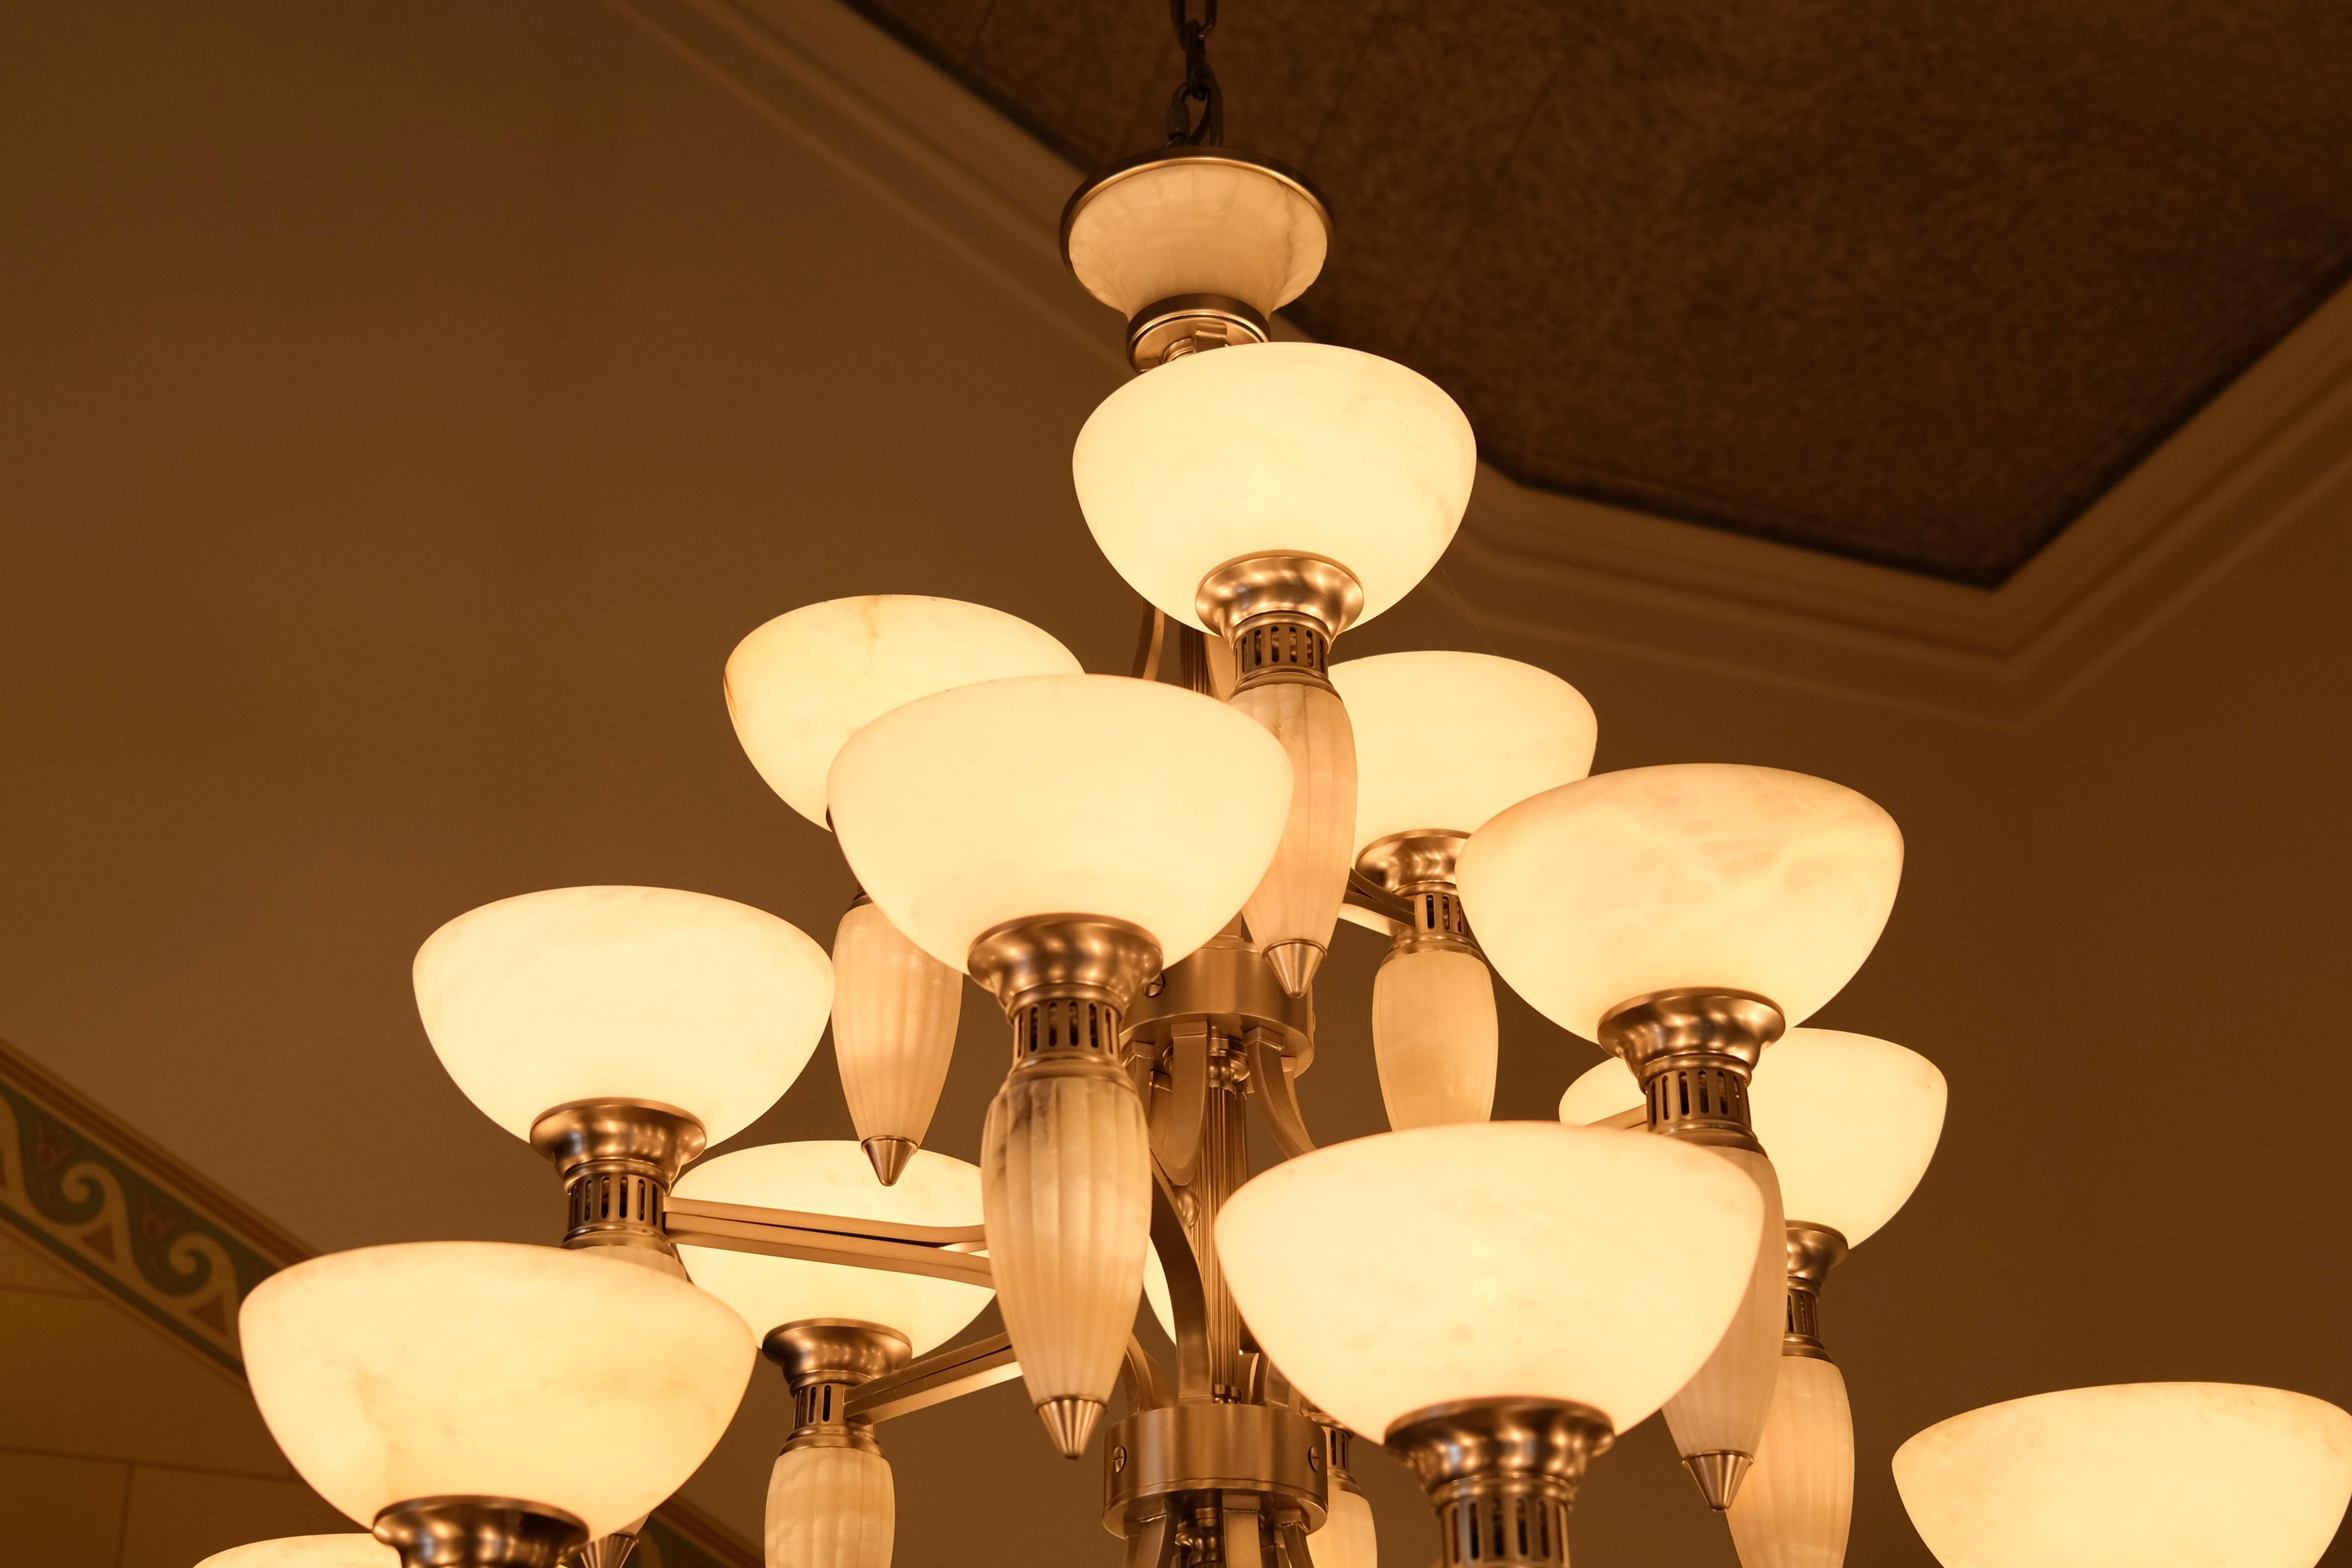 Impressive Art Deco Style Chandelier with Alabaster Bowls and Illuminated Cones For Sale 1